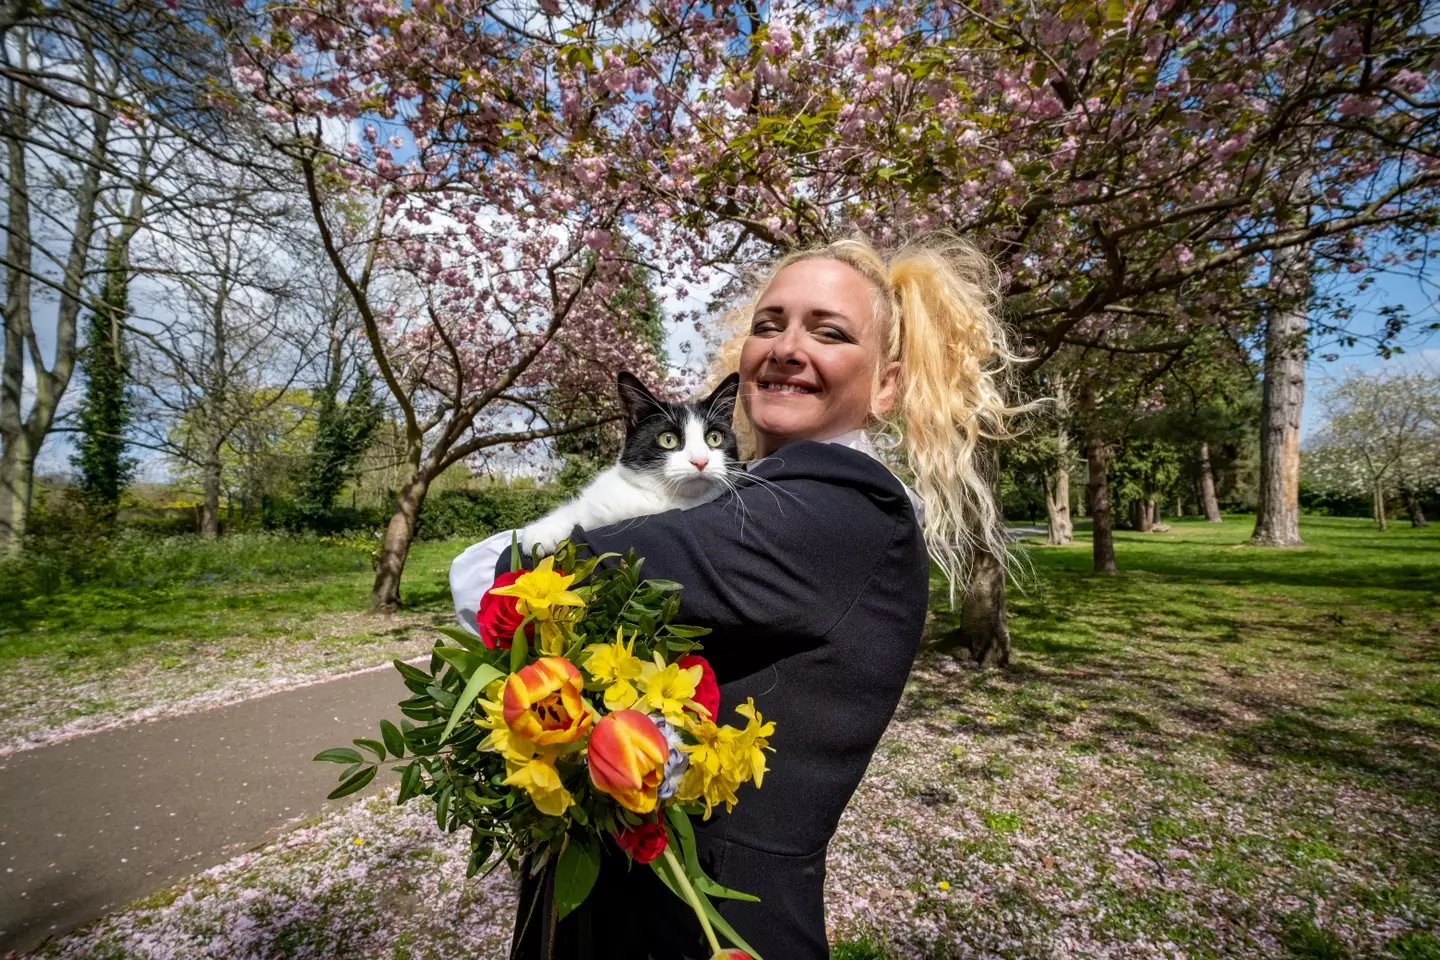 Deborah Hodge made the decision to legally marry her cat India.